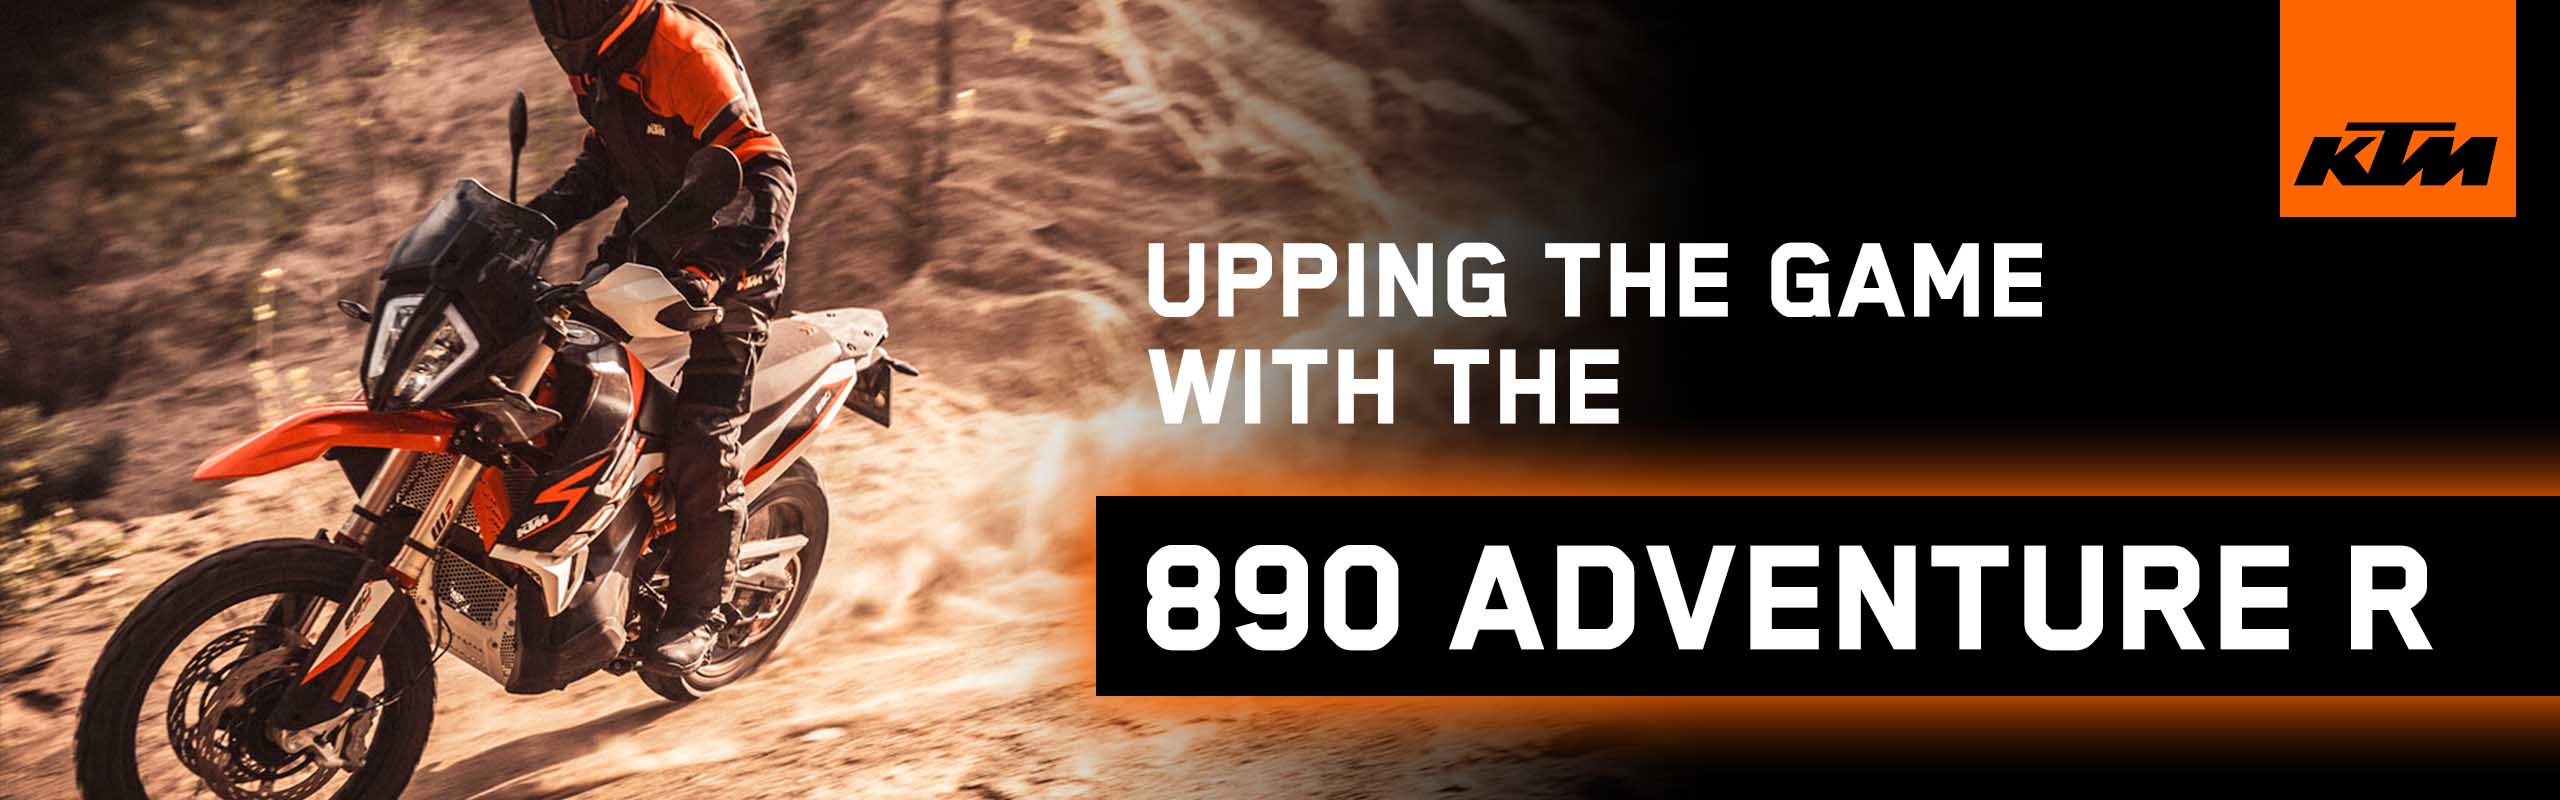 KTM 890 Adventure R - Upping the Game banner